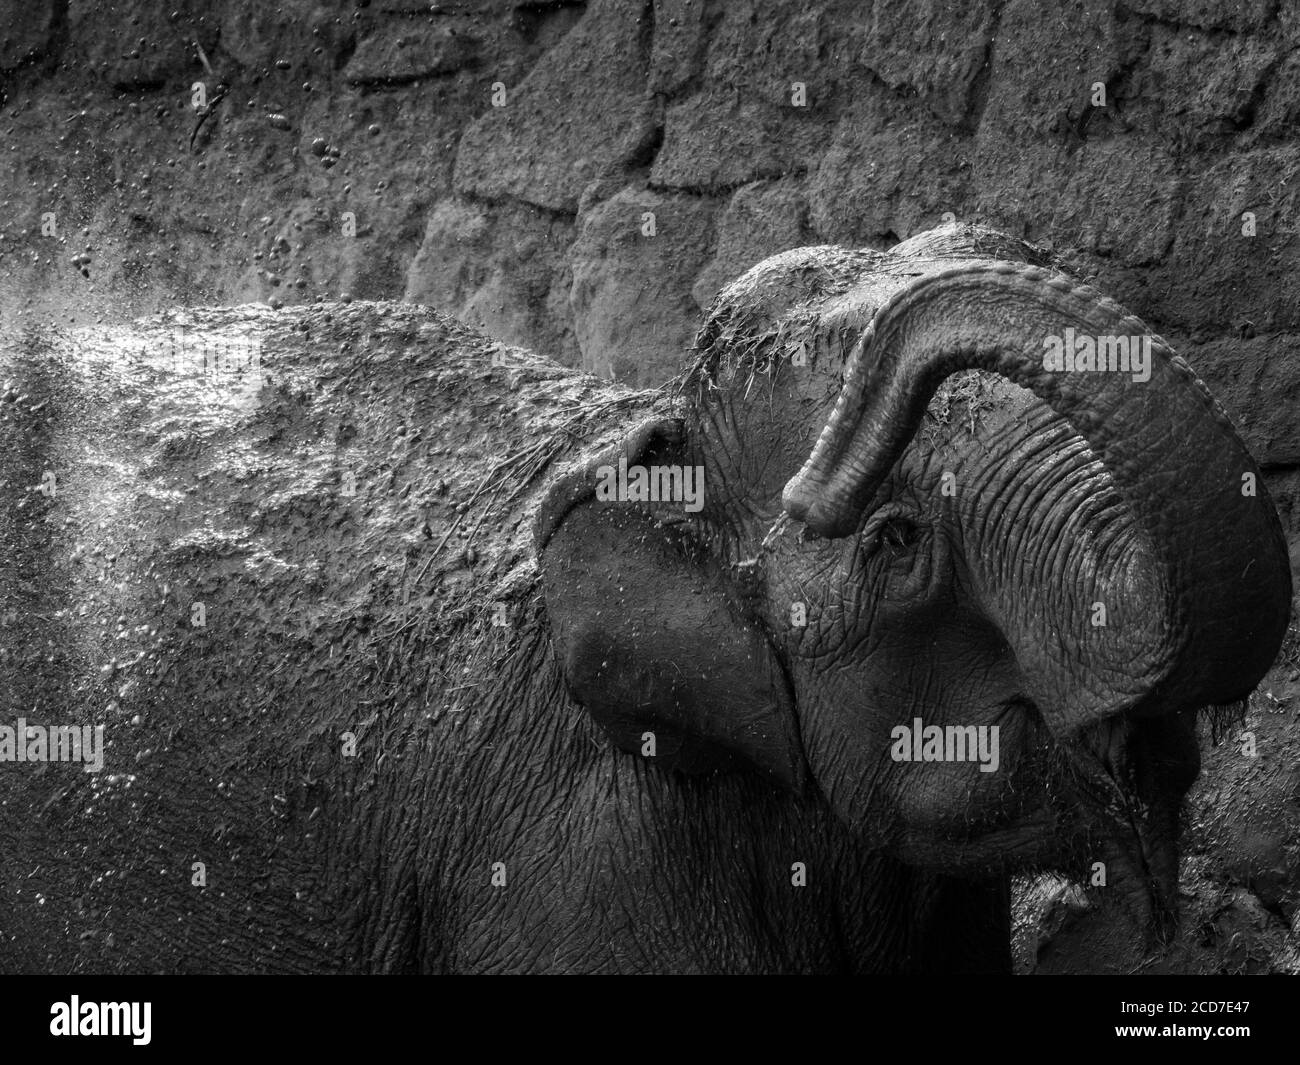 Isolated close up of a single Indian elephant taking a mud bath- Israel Stock Photo